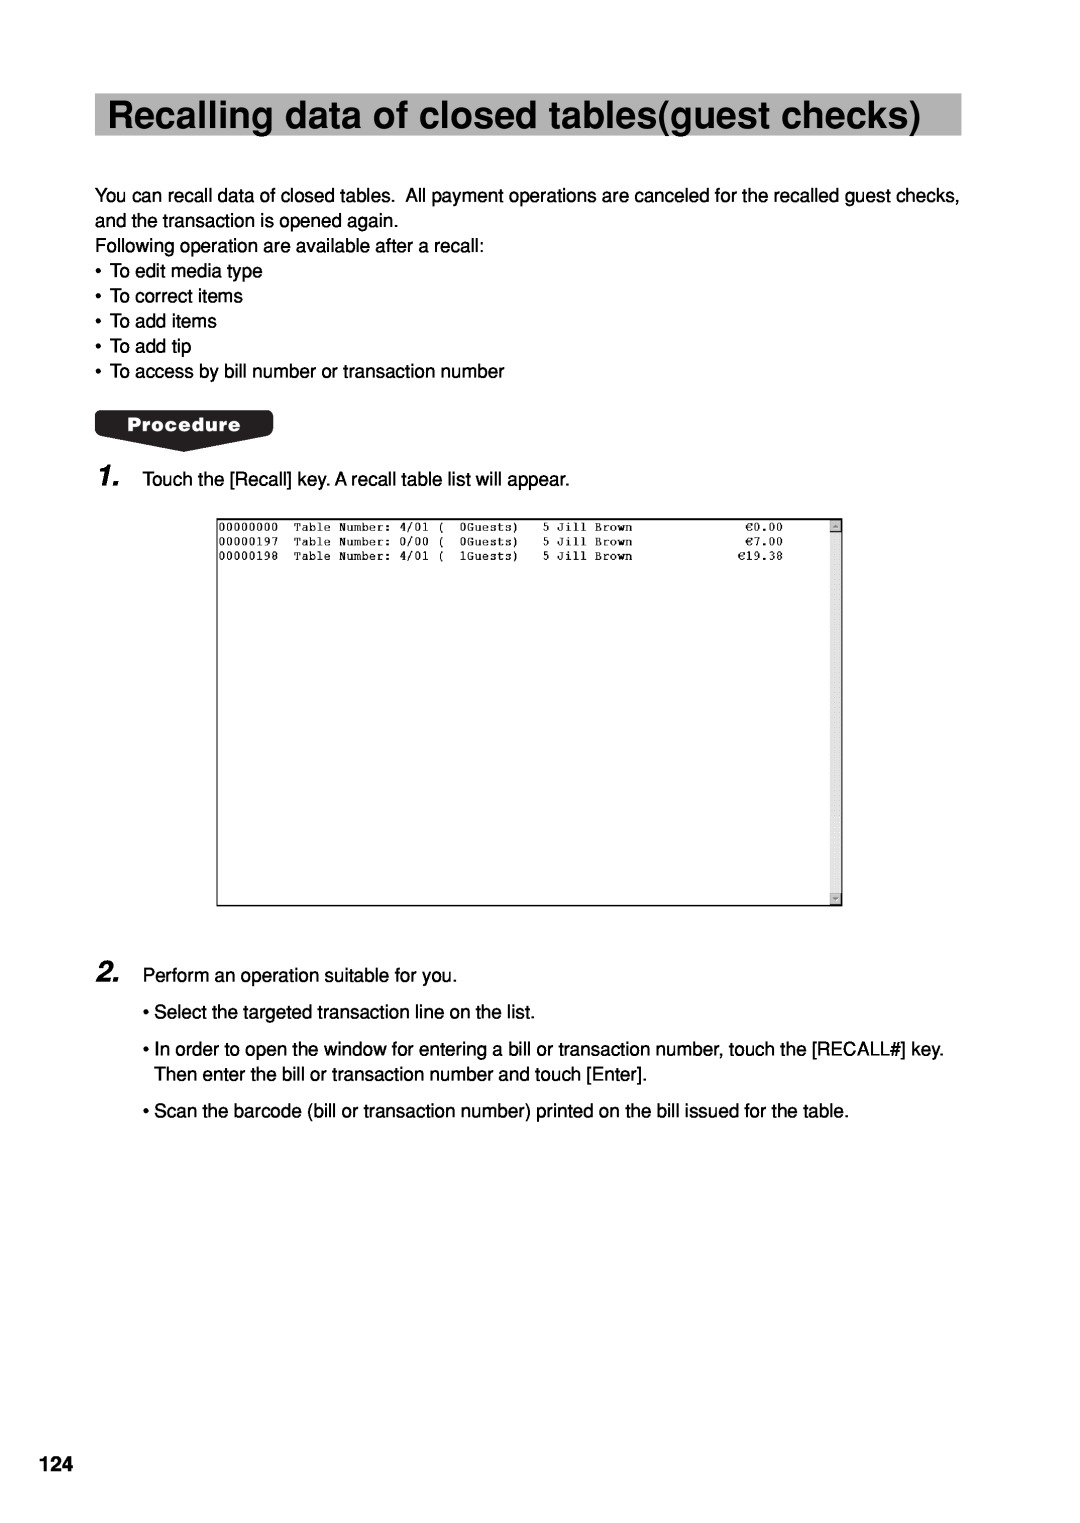 Sharp UP-X300 instruction manual Recalling data of closed tablesguest checks 